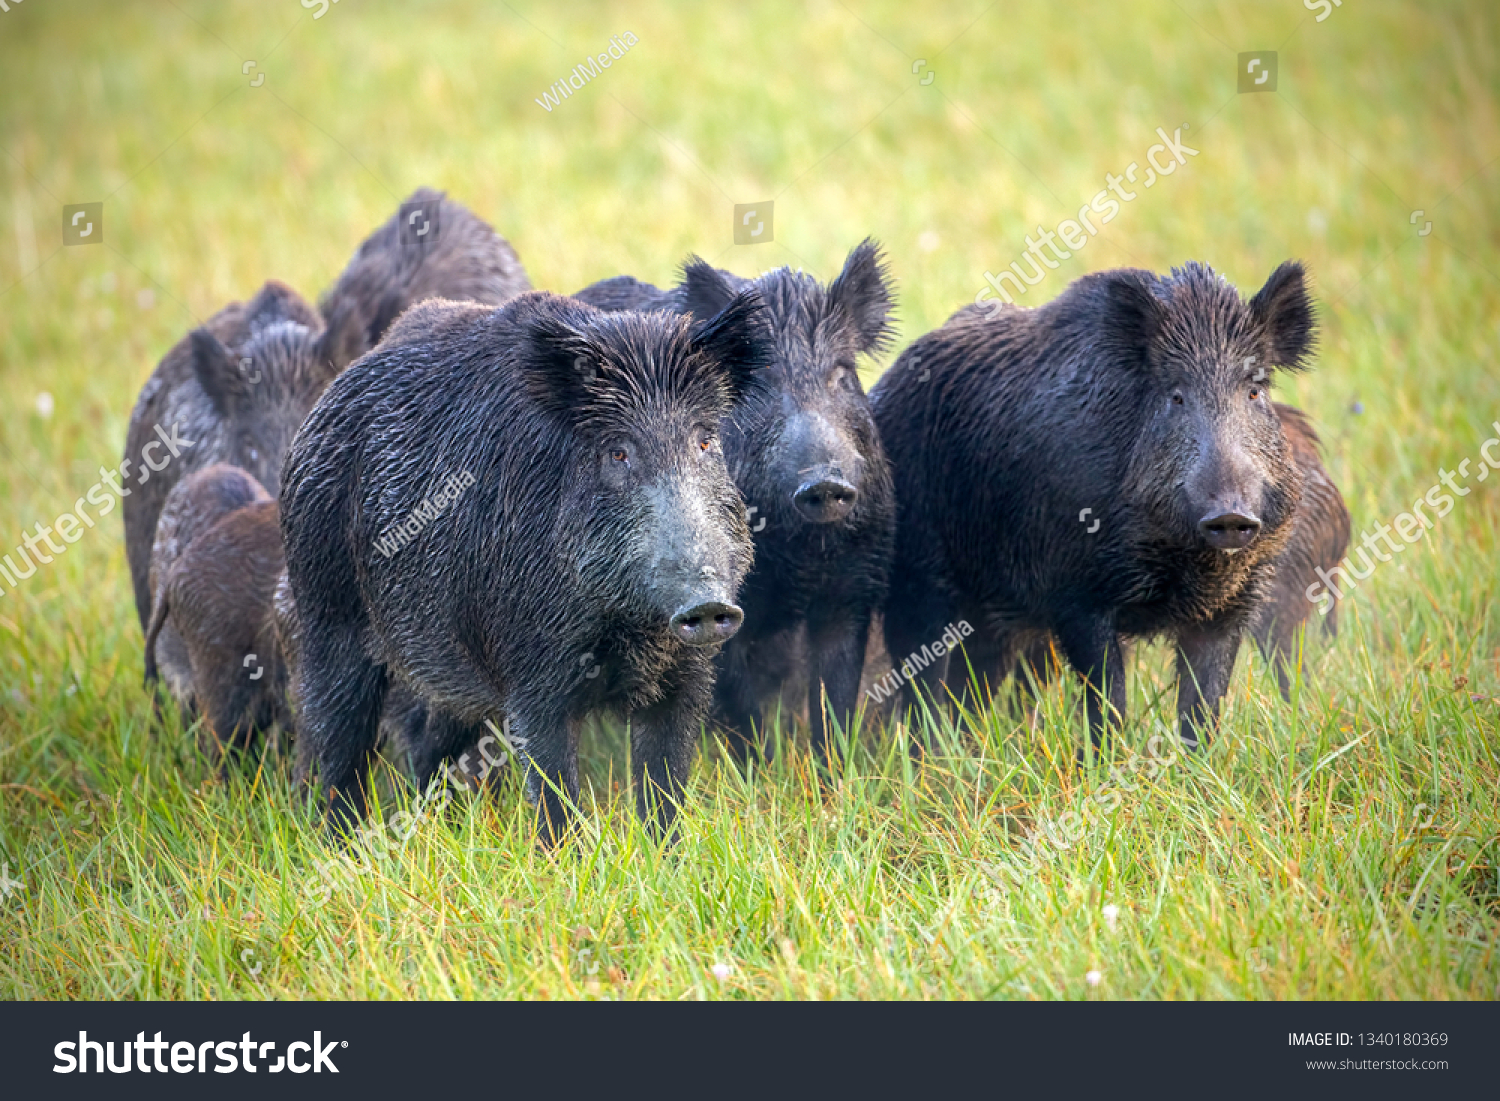 Numerous herd of wild animals in nature. Wild boars, sus scrofa, on a meadow wet from dew. Nature early in the morning with moisture covered grass. Mammals in wilderness. #1340180369